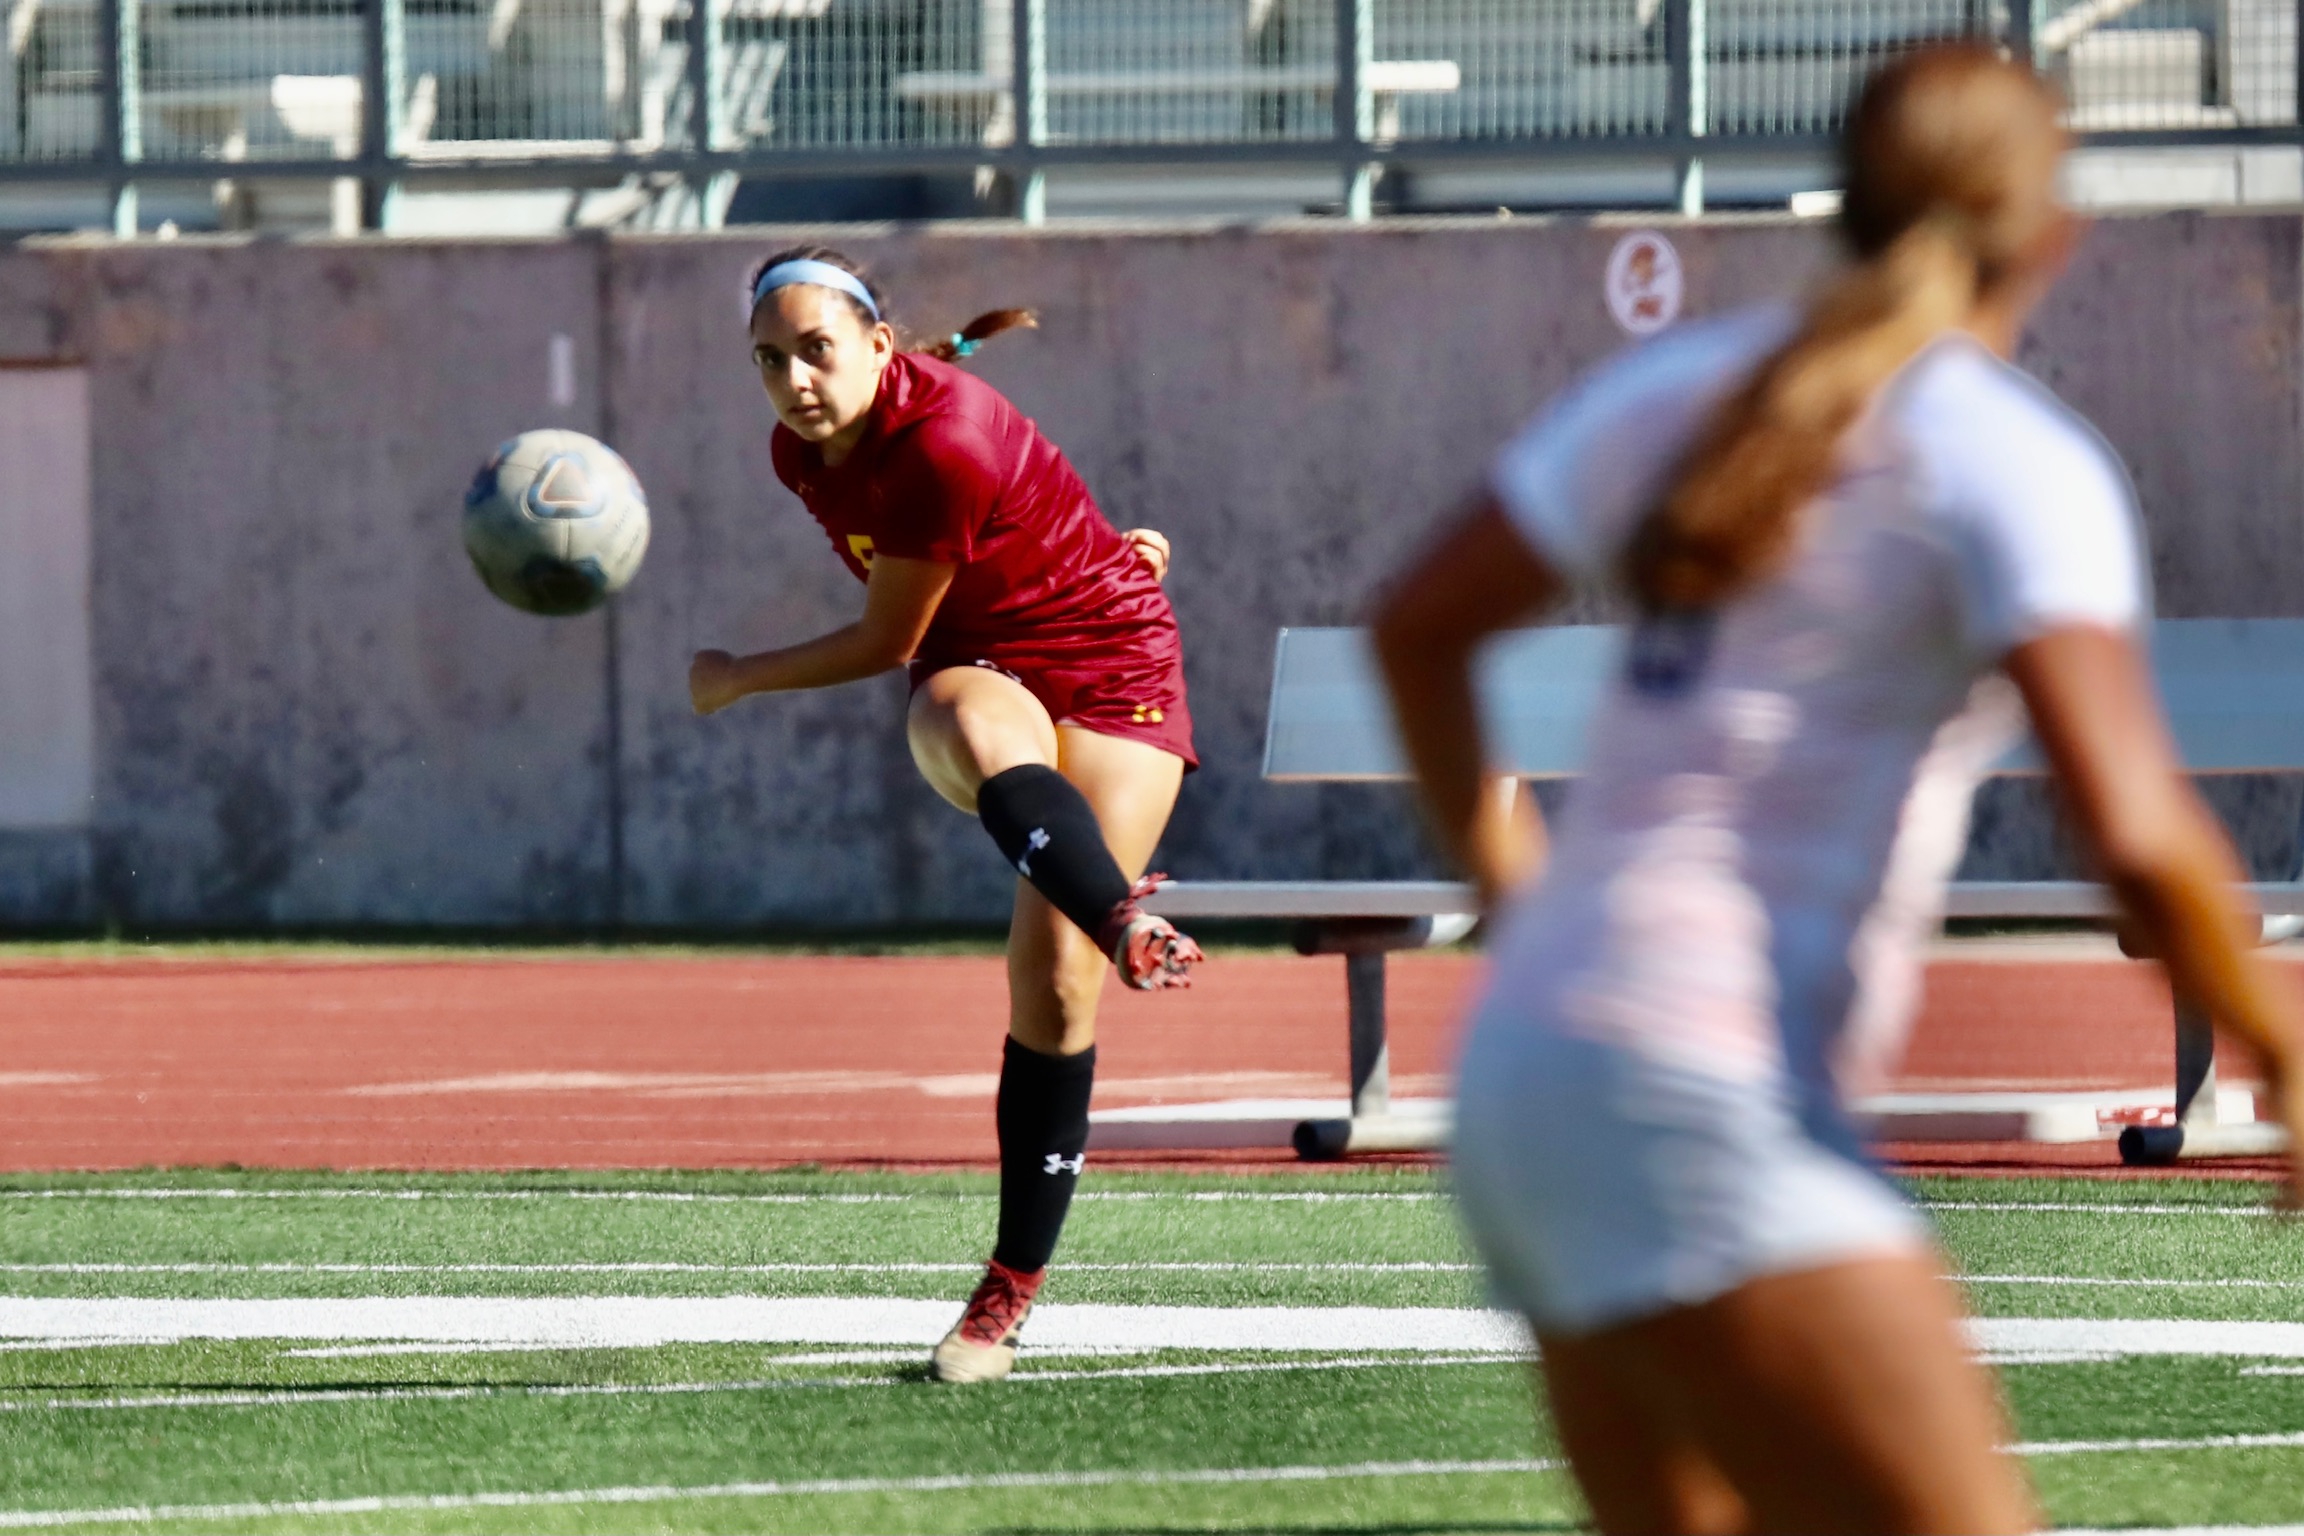 Lancers defender Angie Alvarado was a standout in PCC's loss to Orange Coast on Tuesday afternoon (photo by Michael Watkins).